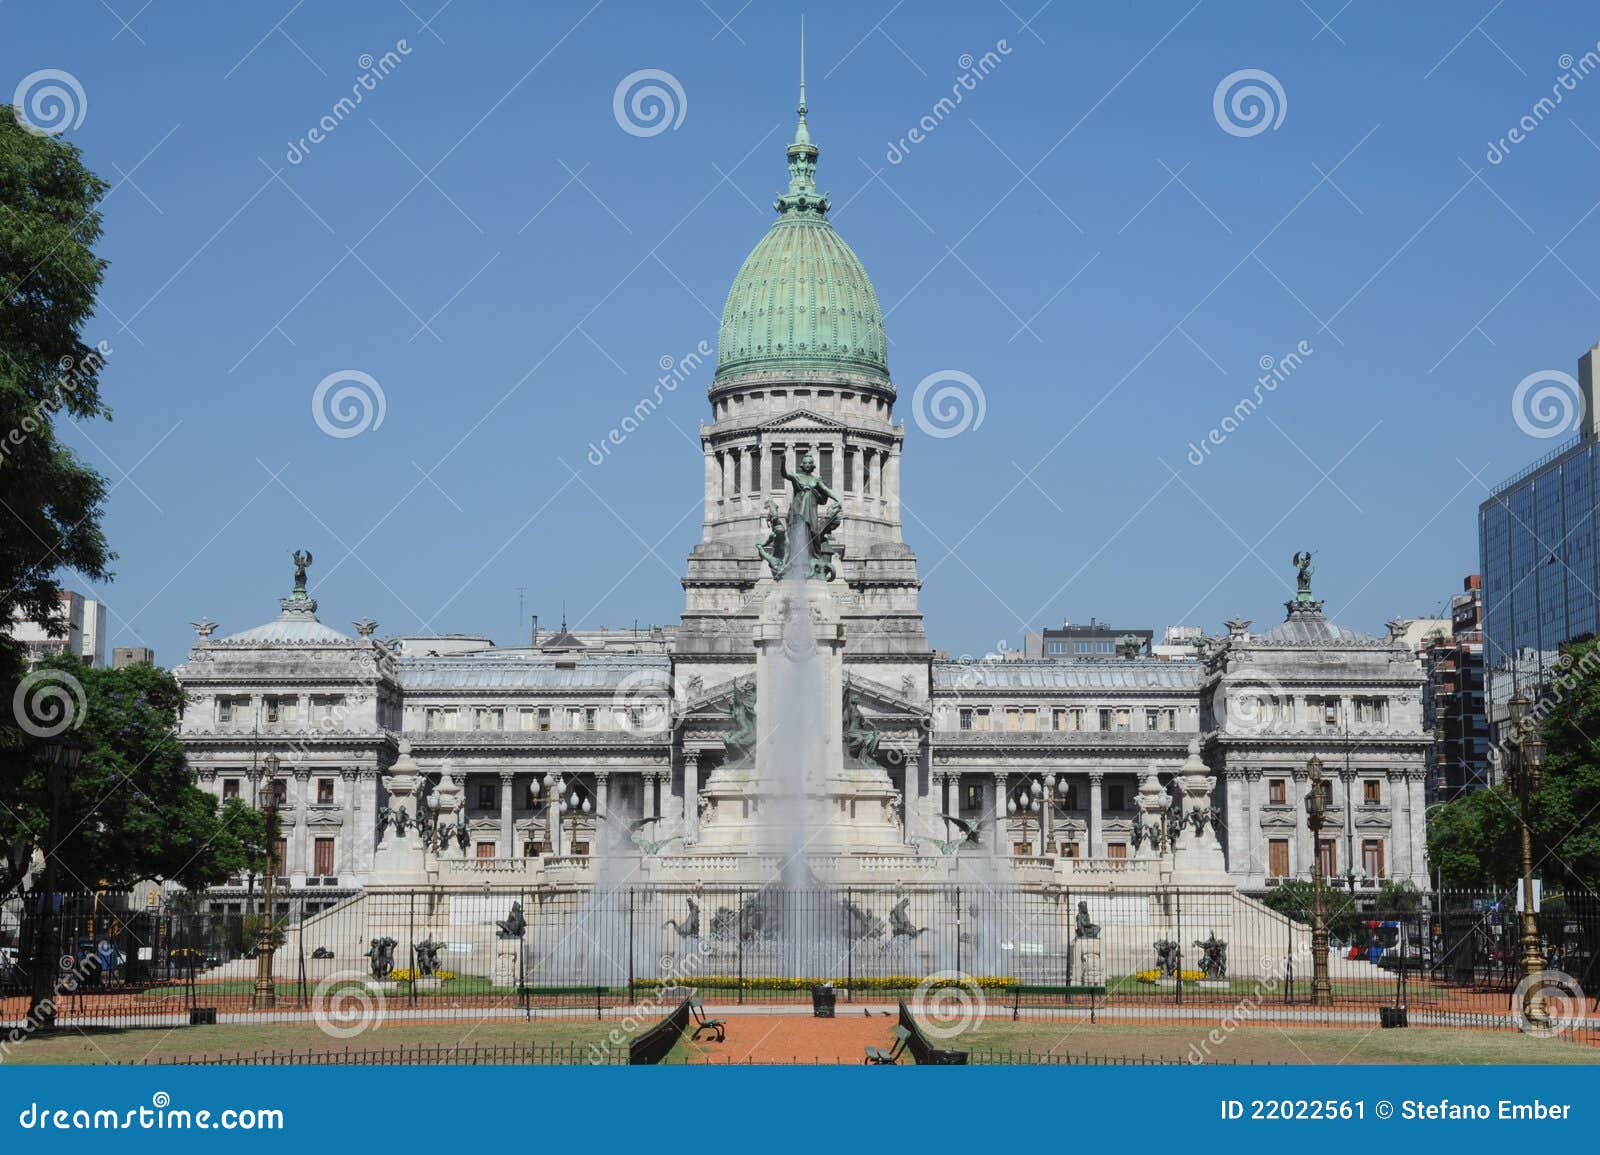 government palace at buenos aires